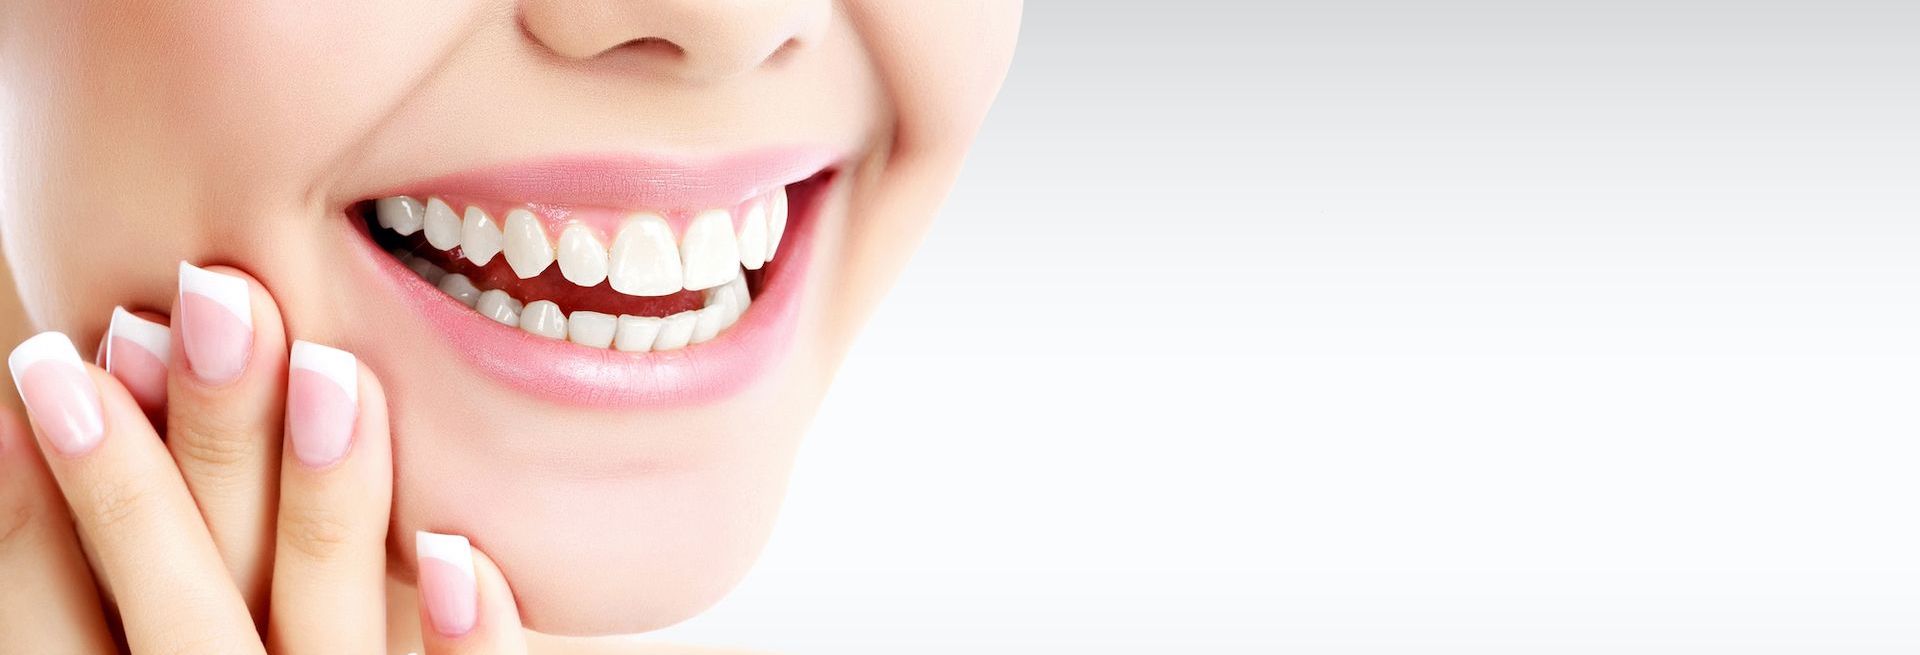 How dental crowns can improve your oral health and confidence